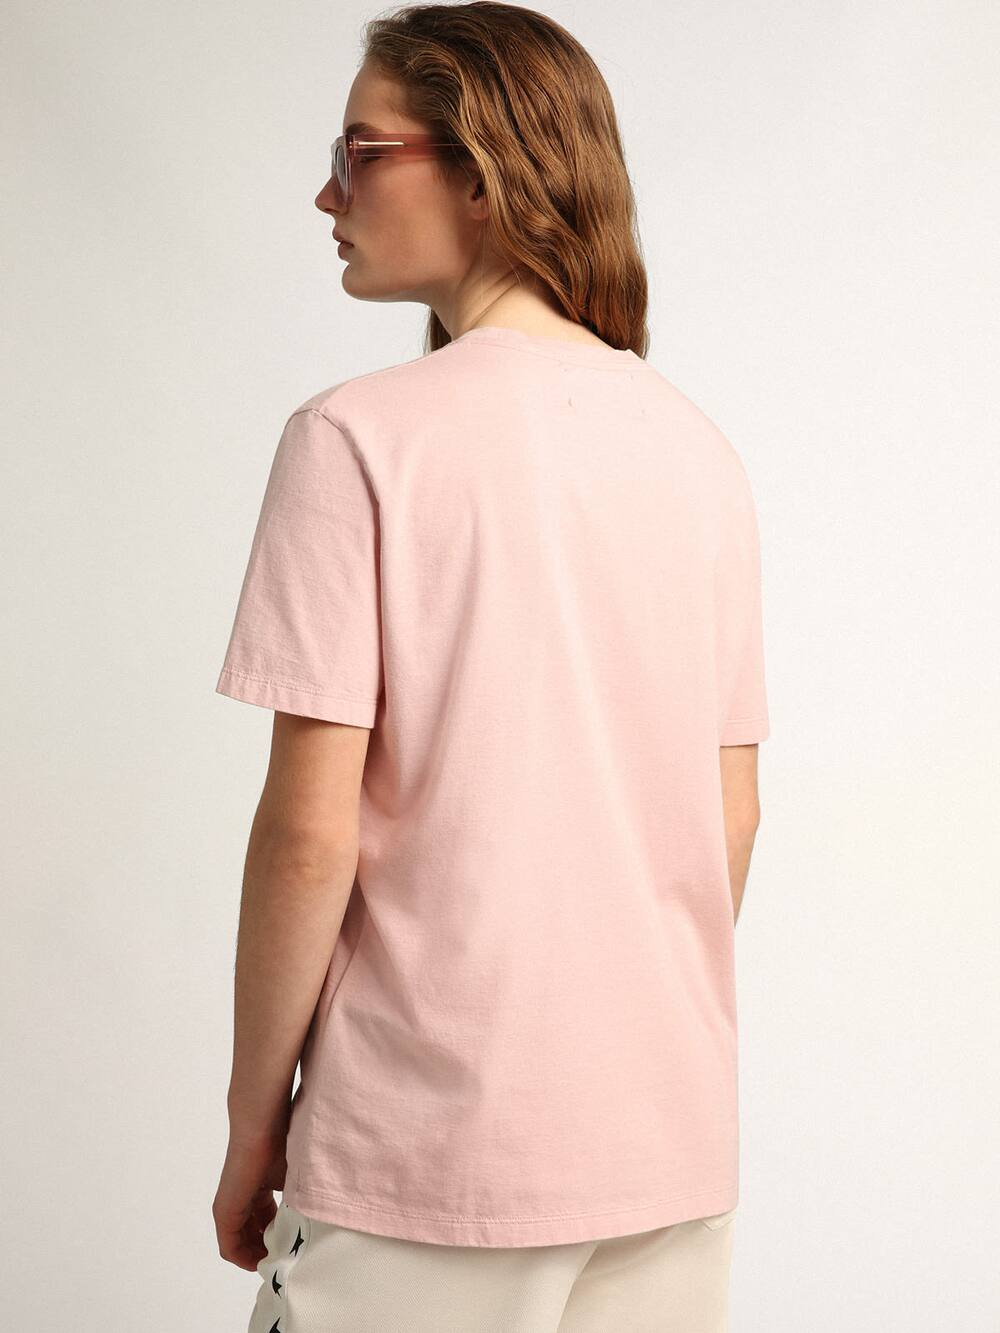 Golden Goose - Women's lavender pink T-shirt with white star on the front in 